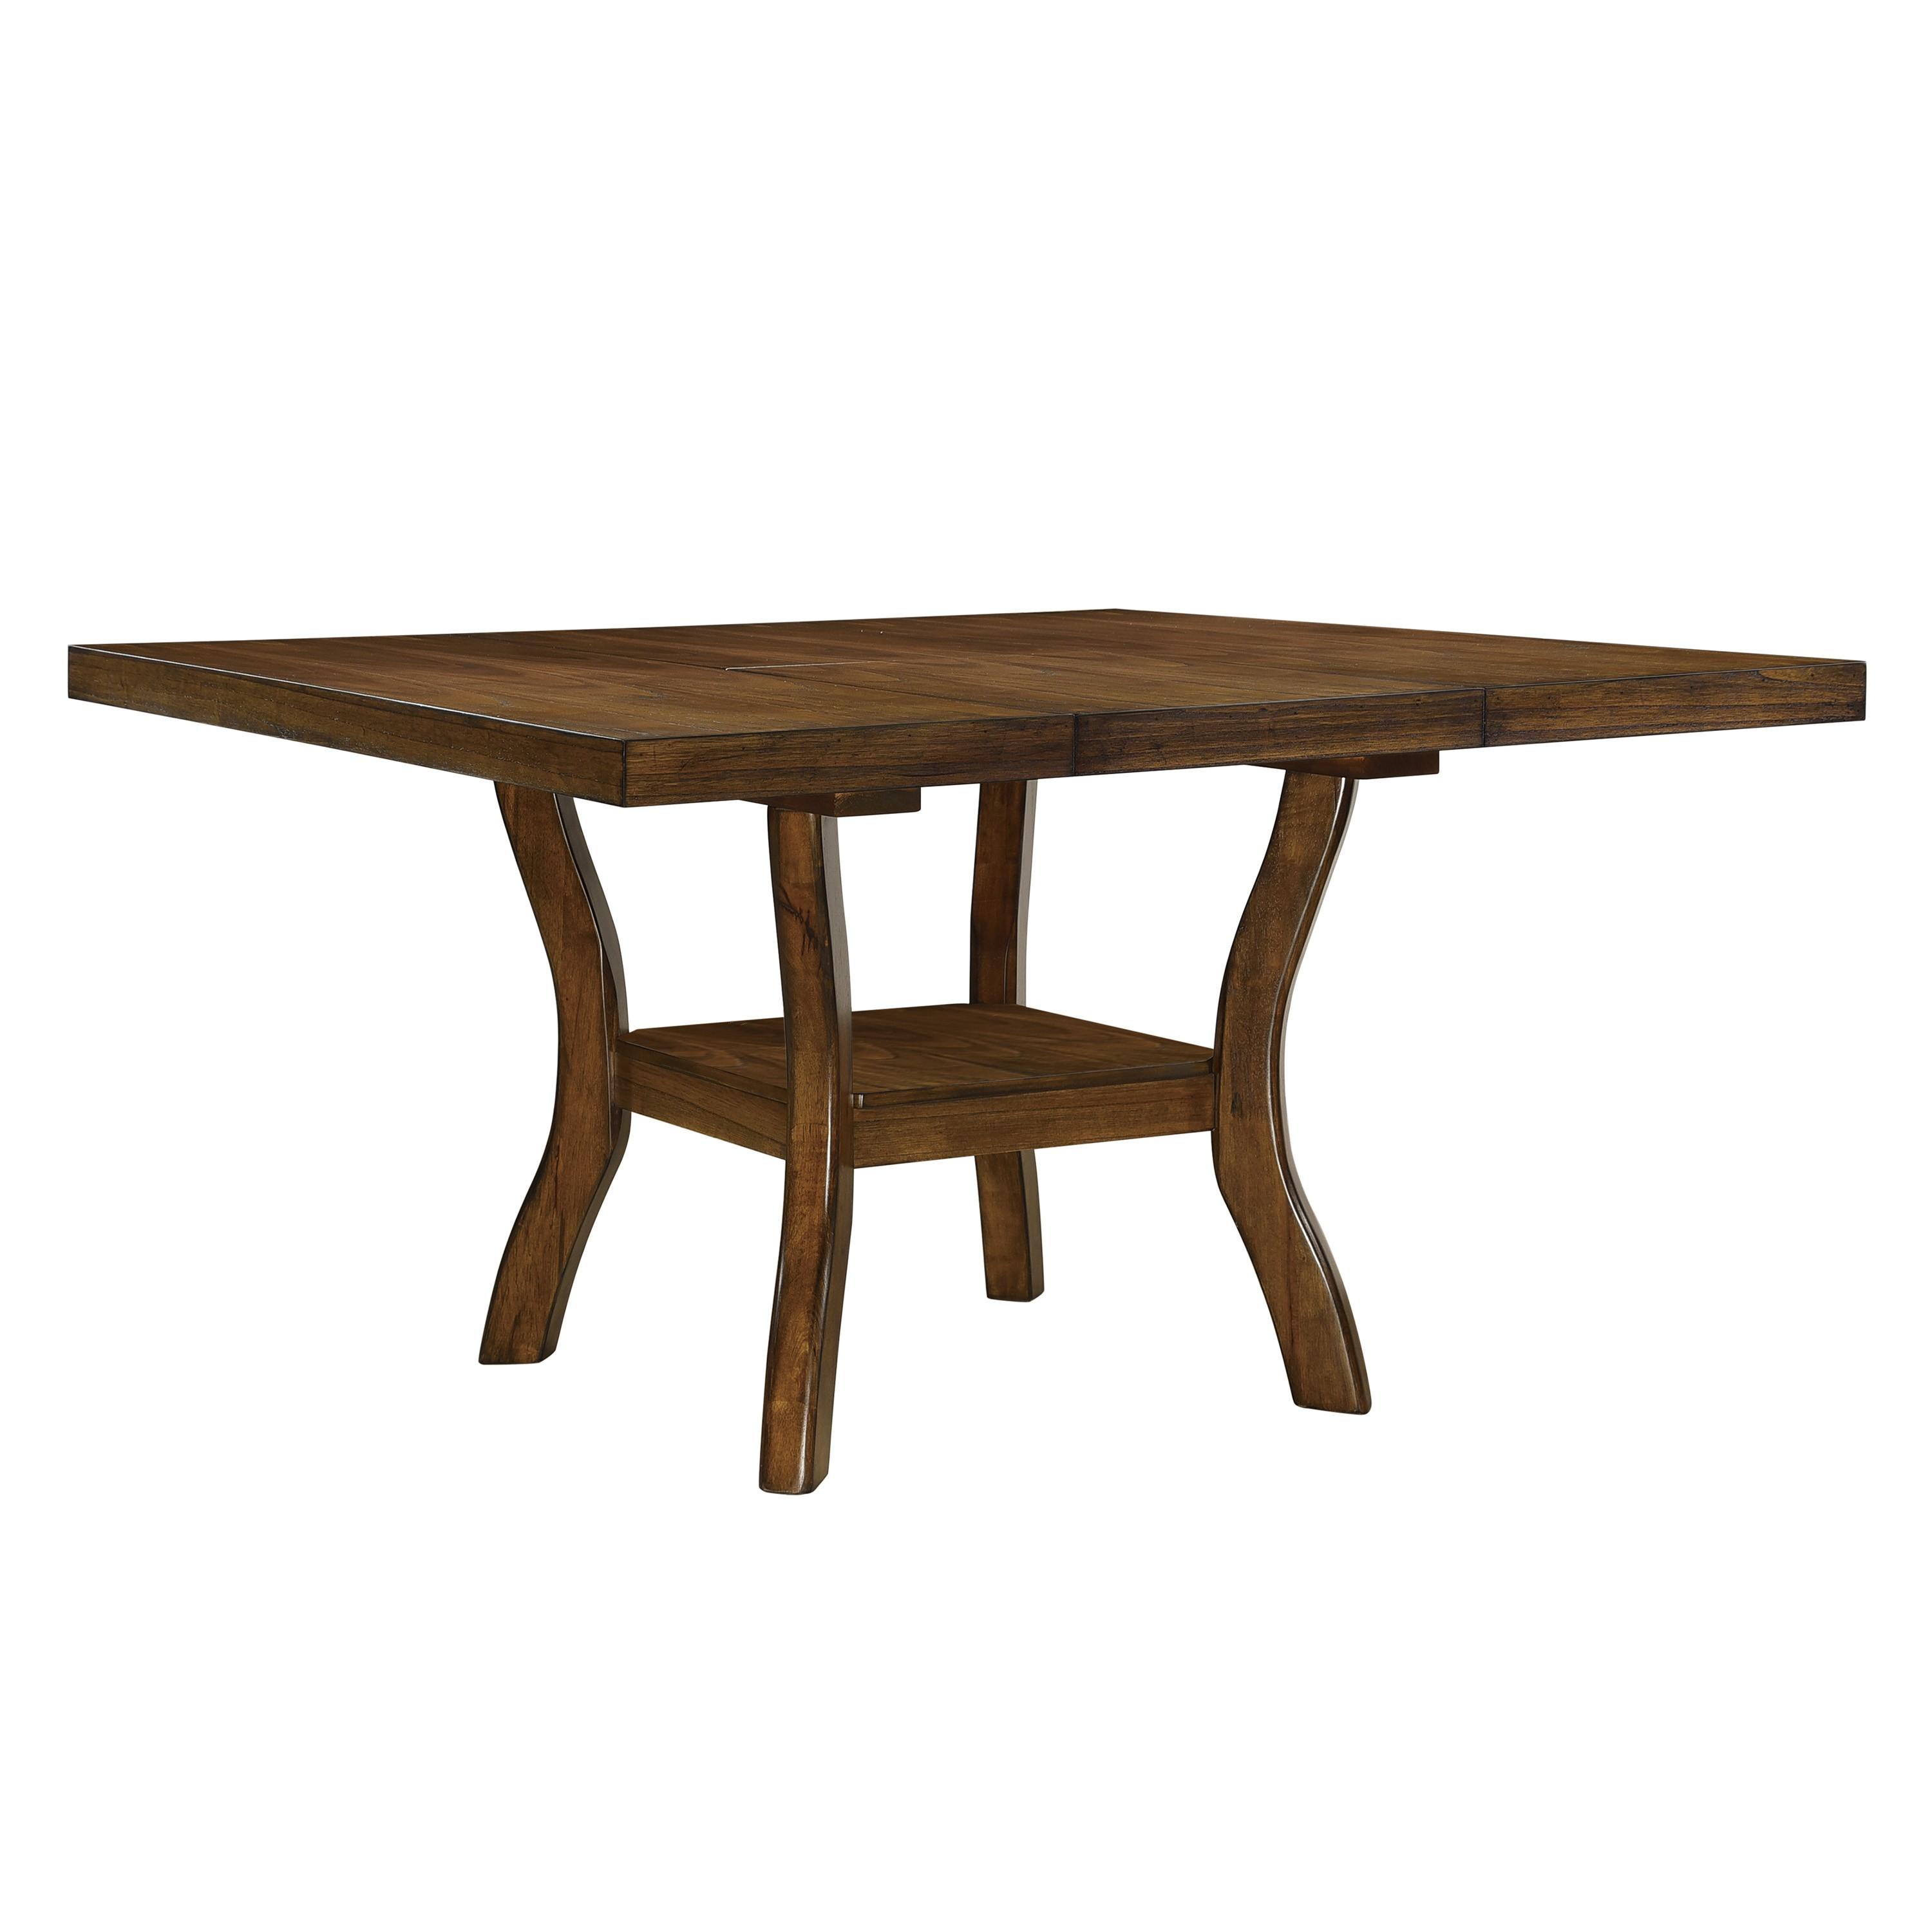 Transitional Dining Table 5712-54* Darla 5712-54* in Brown 